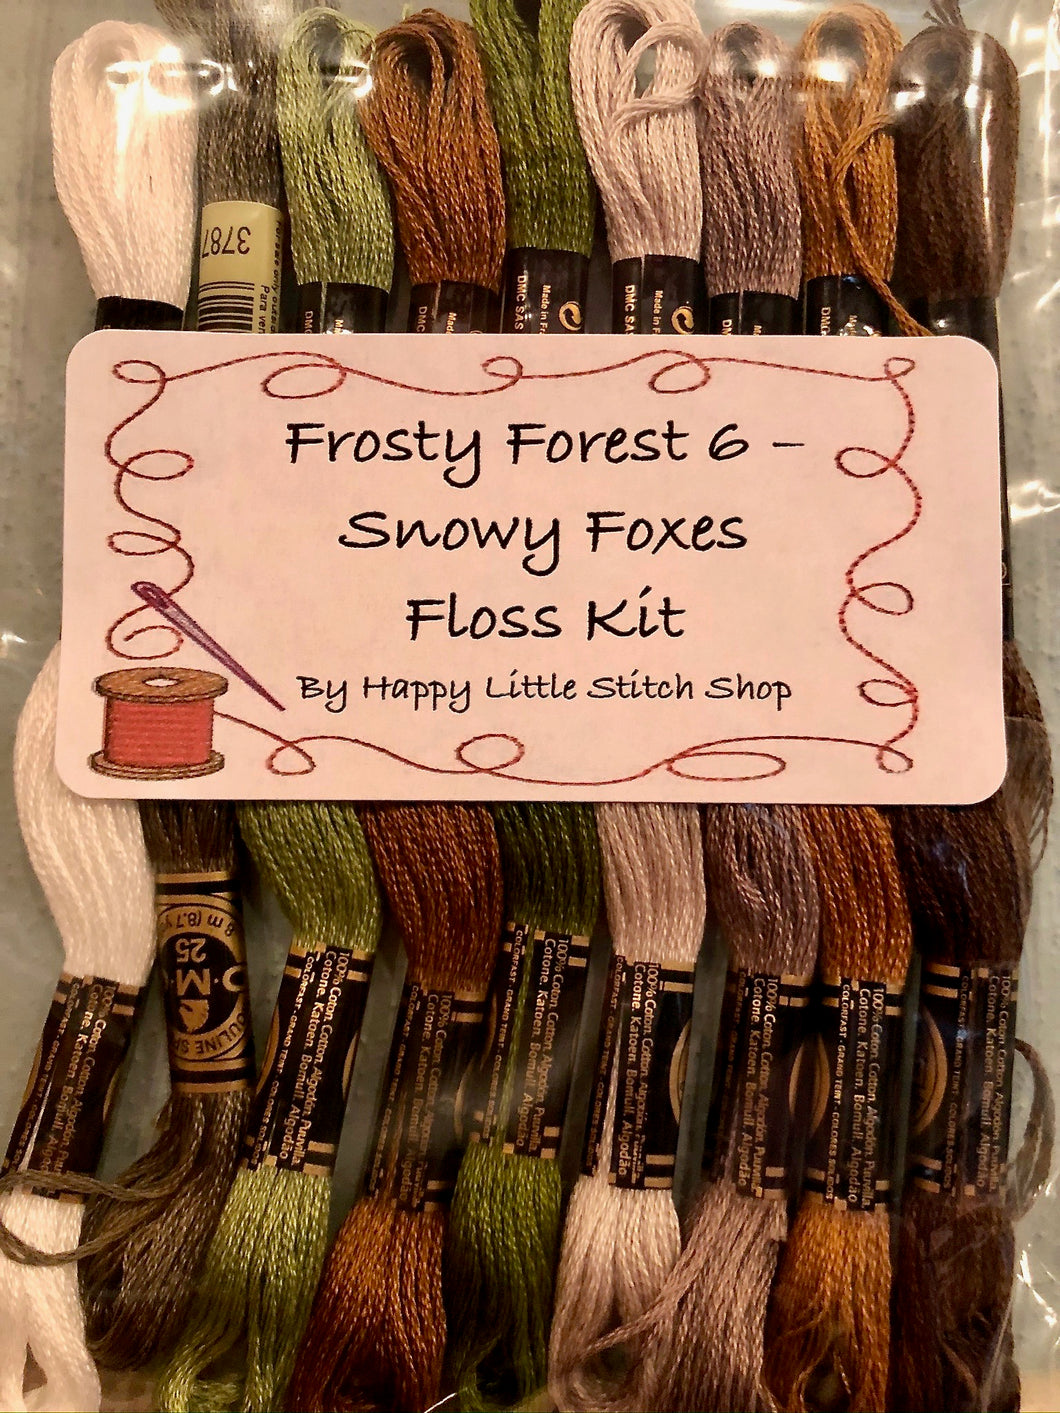 Floss Kit - Frosty Forest 6 - Snowy Foxes